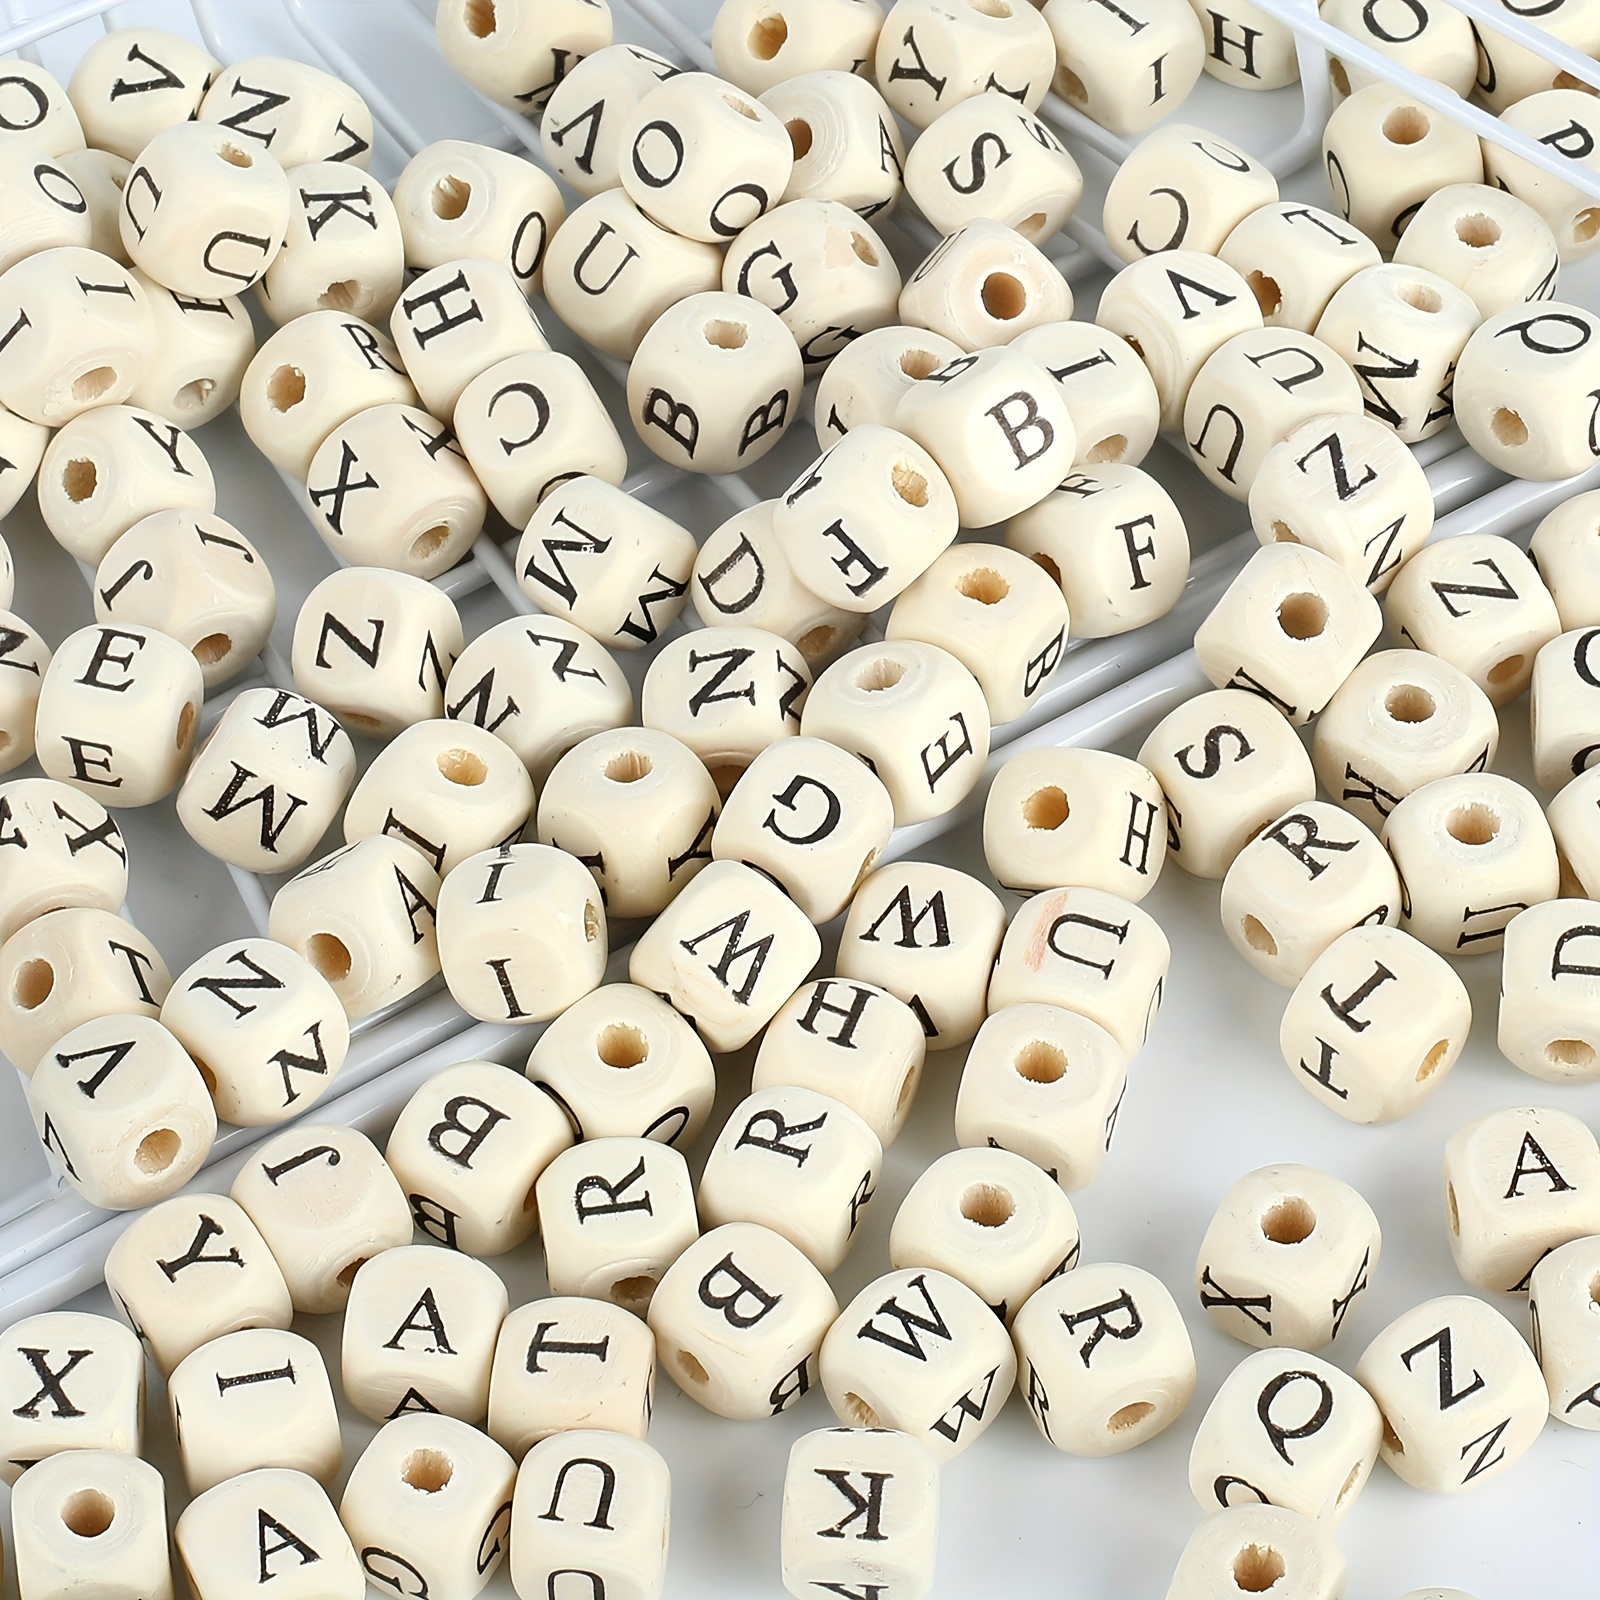 52Pcs Alphabet Wooden Beads 12mm Square Wooden Beads AZ Wooden Alphabet  Beads Letter Beads Loose Beads for Jewelry Making and DIY Crafts